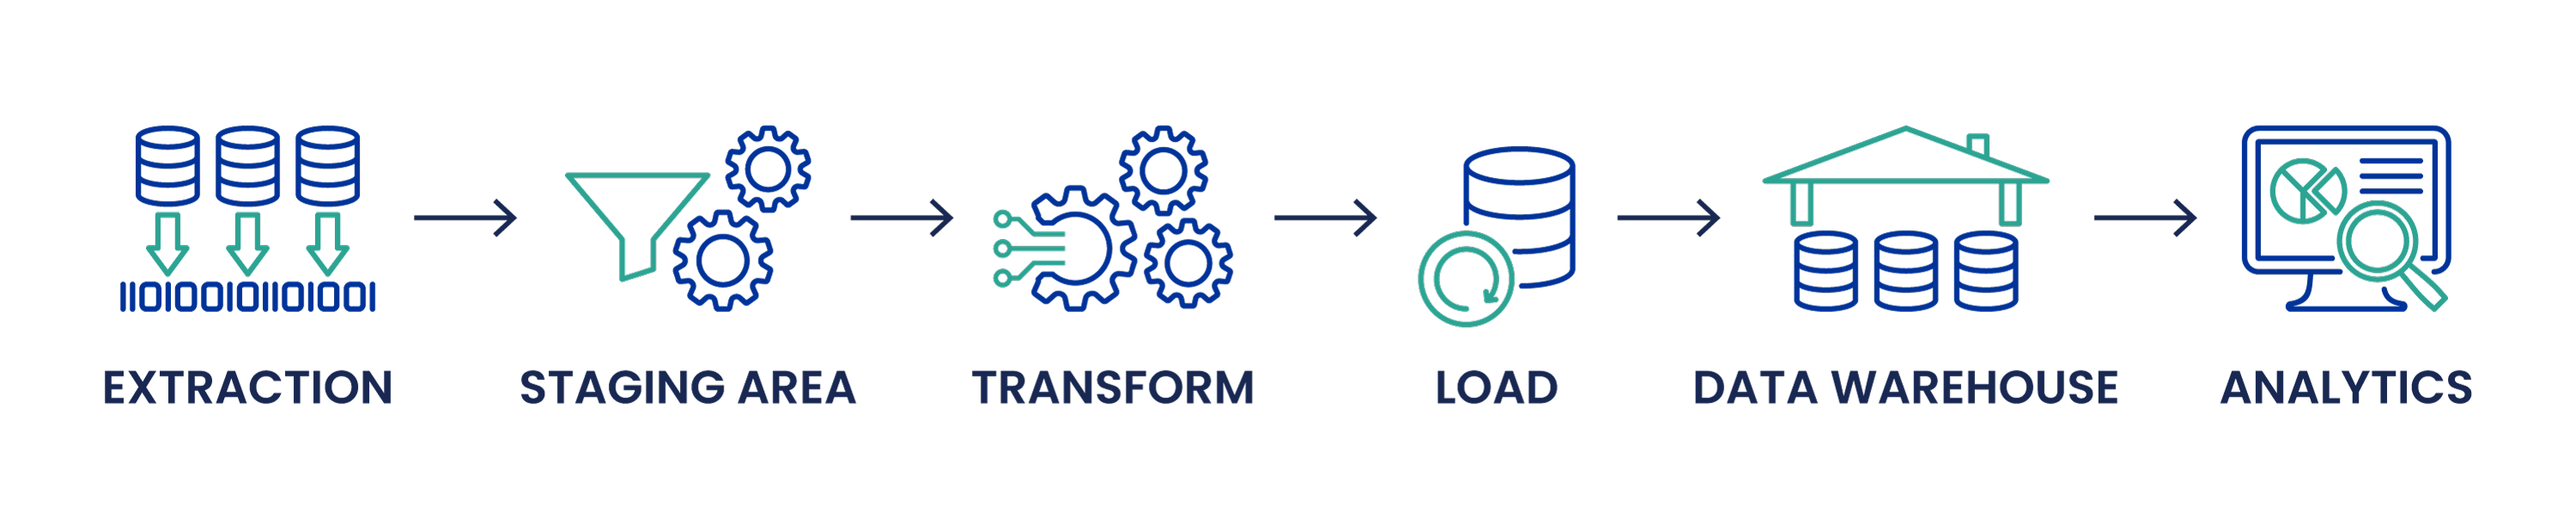 ETL (extract, transform, load) is the process of extracting data from one or more sources and moving it to a staging environment.